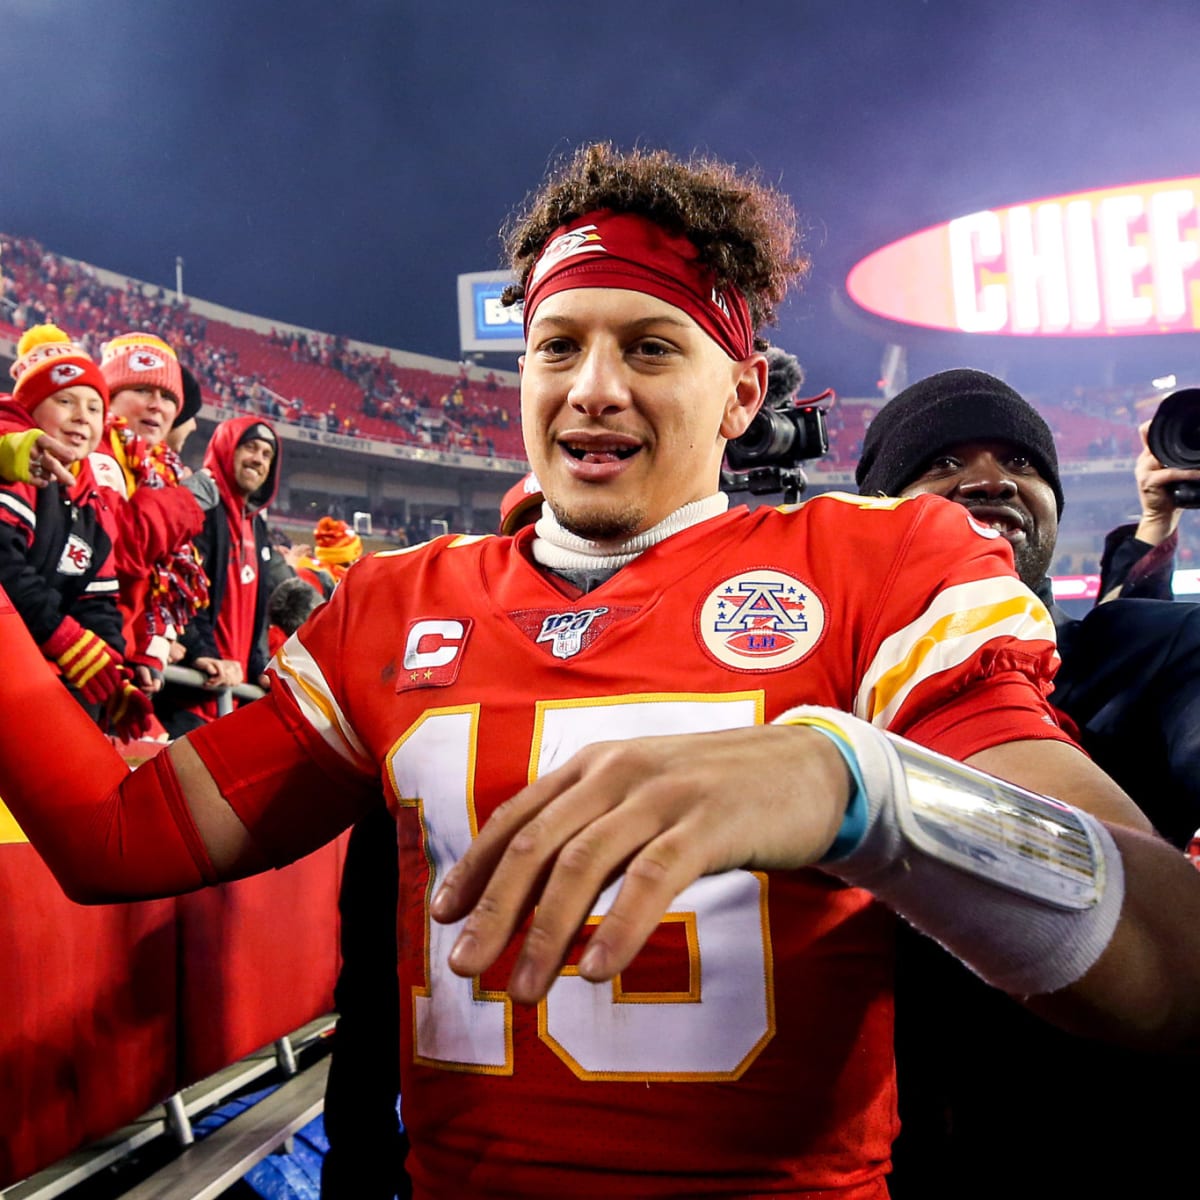 Rapper Post Malone Has a Tattoo of Patrick Mahomes Signature on His Body  Heres Why  EssentiallySports